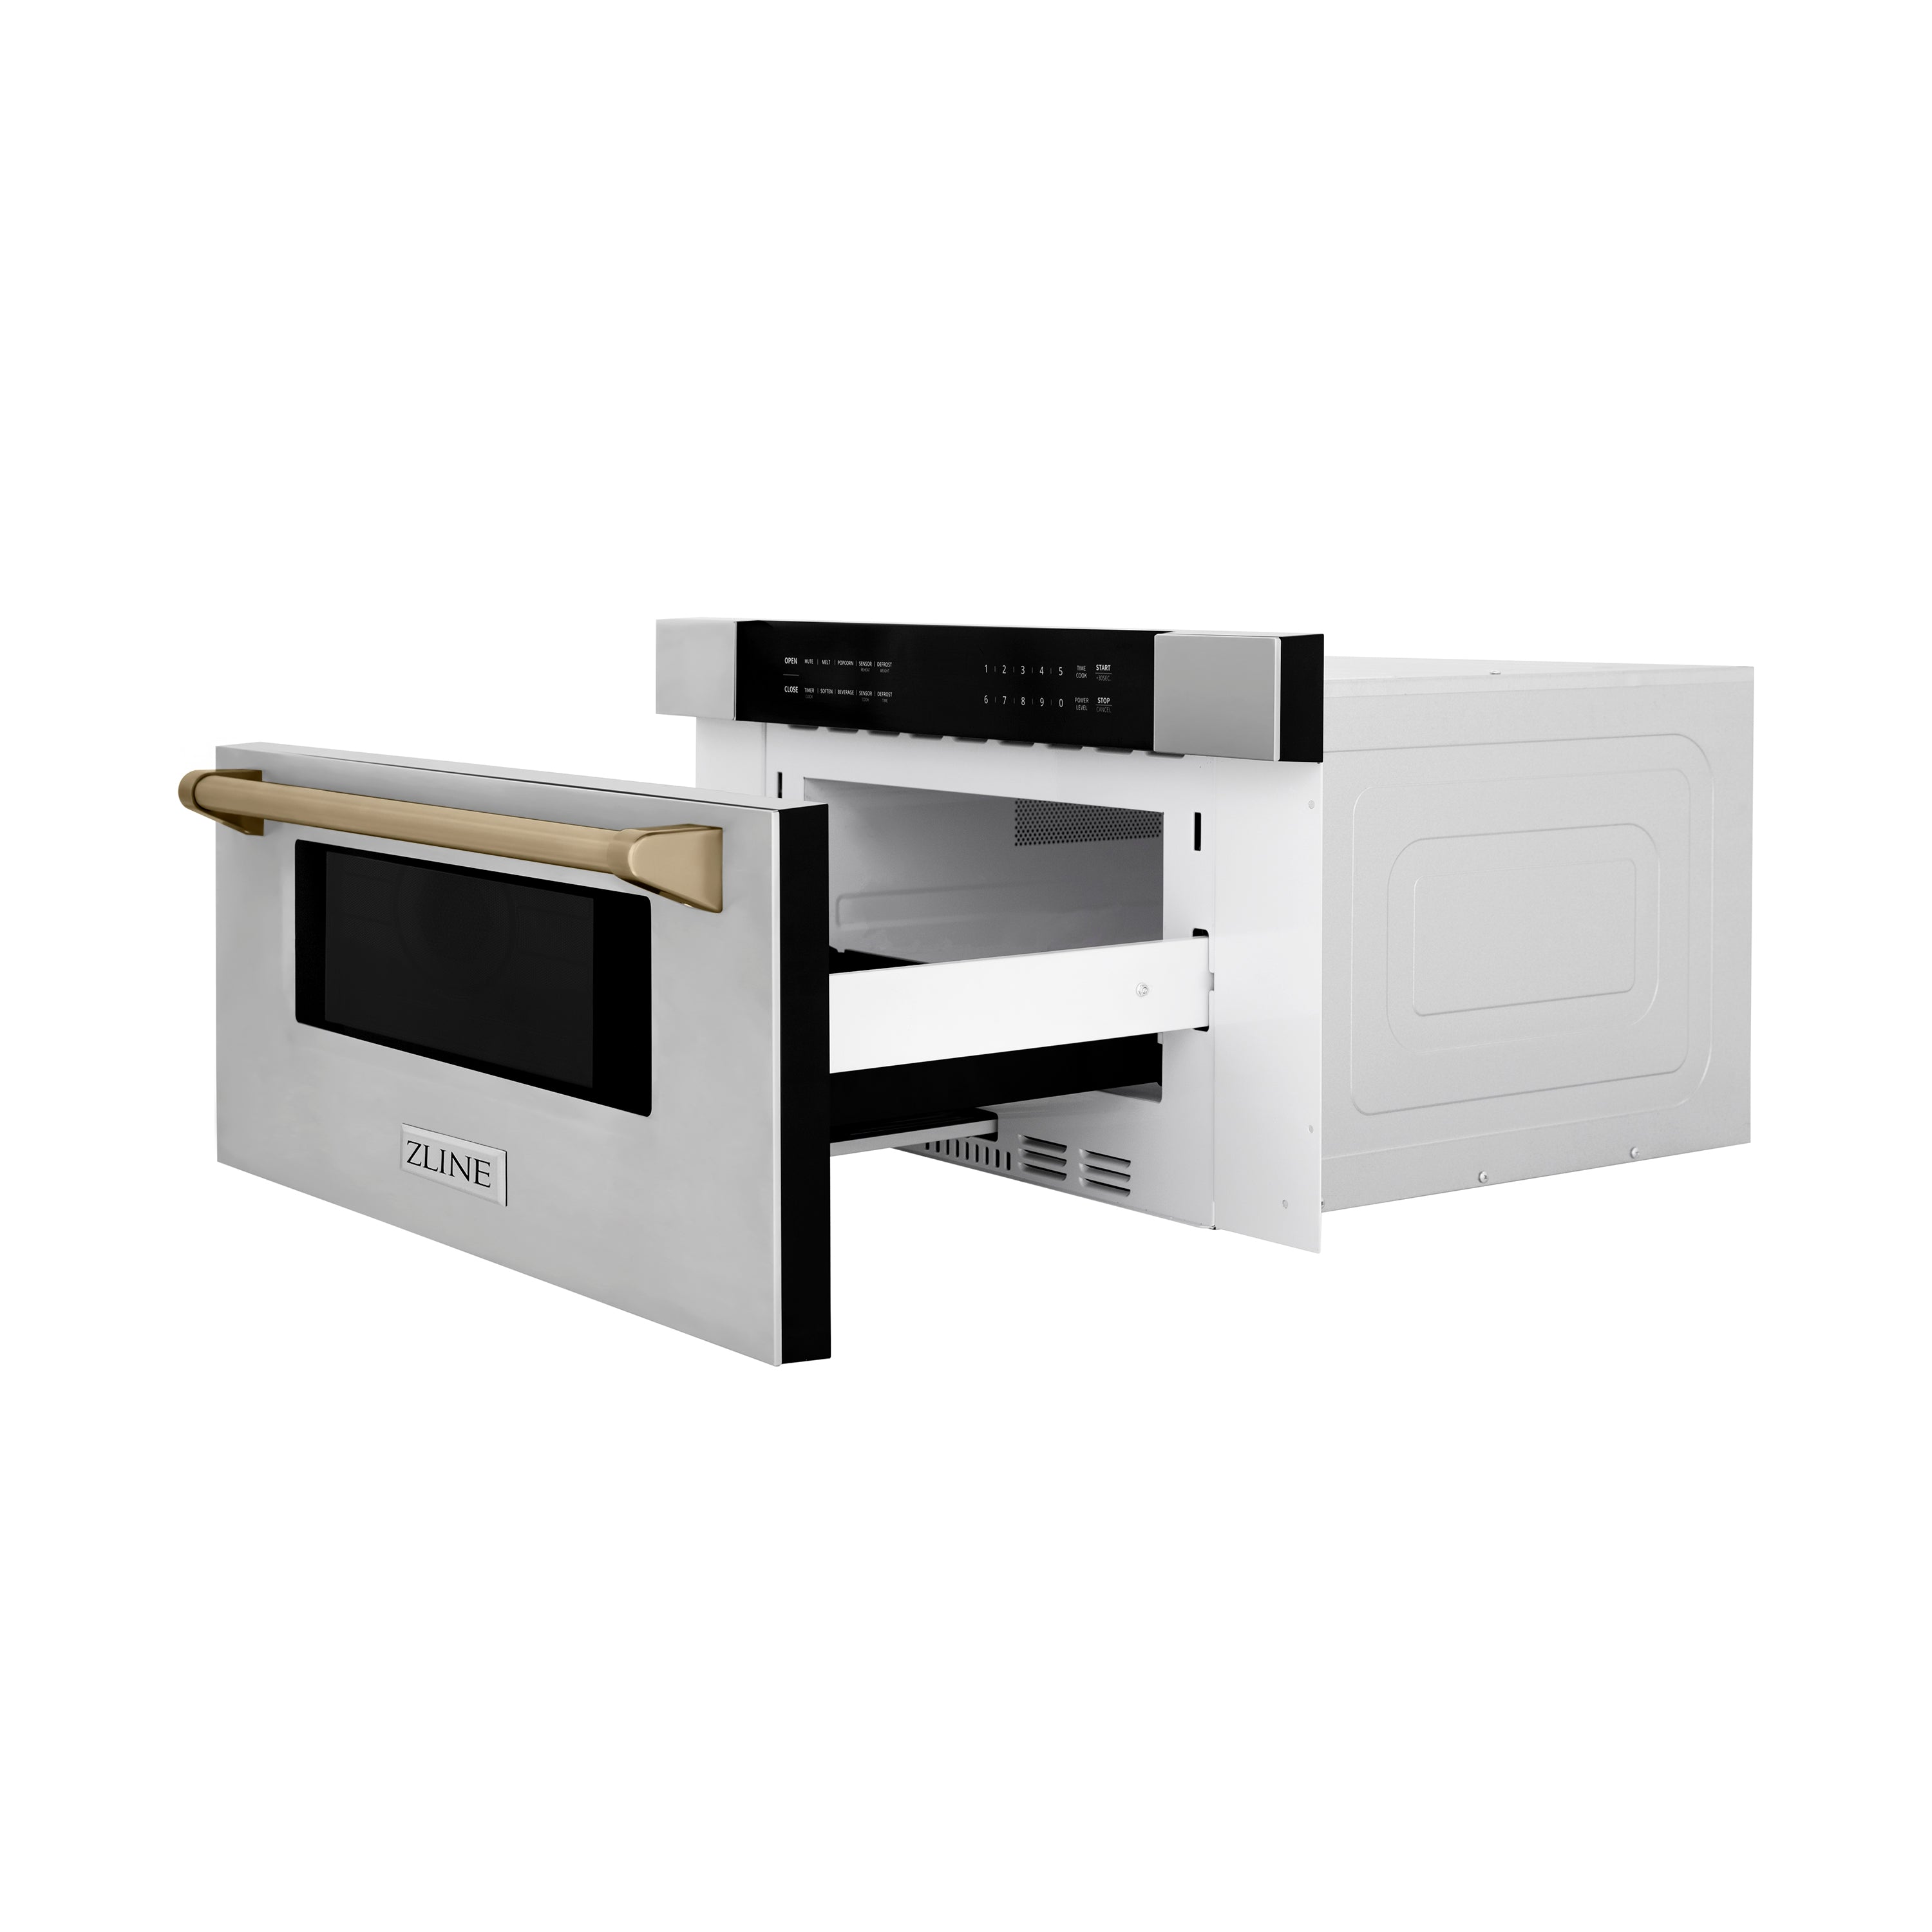 ZLINE Autograph Edition 30 in. 1.2 cu. ft. Built-In Microwave Drawer in Stainless Steel with Champagne Bronze Accents (MWDZ-30-CB) Side View Drawer Open